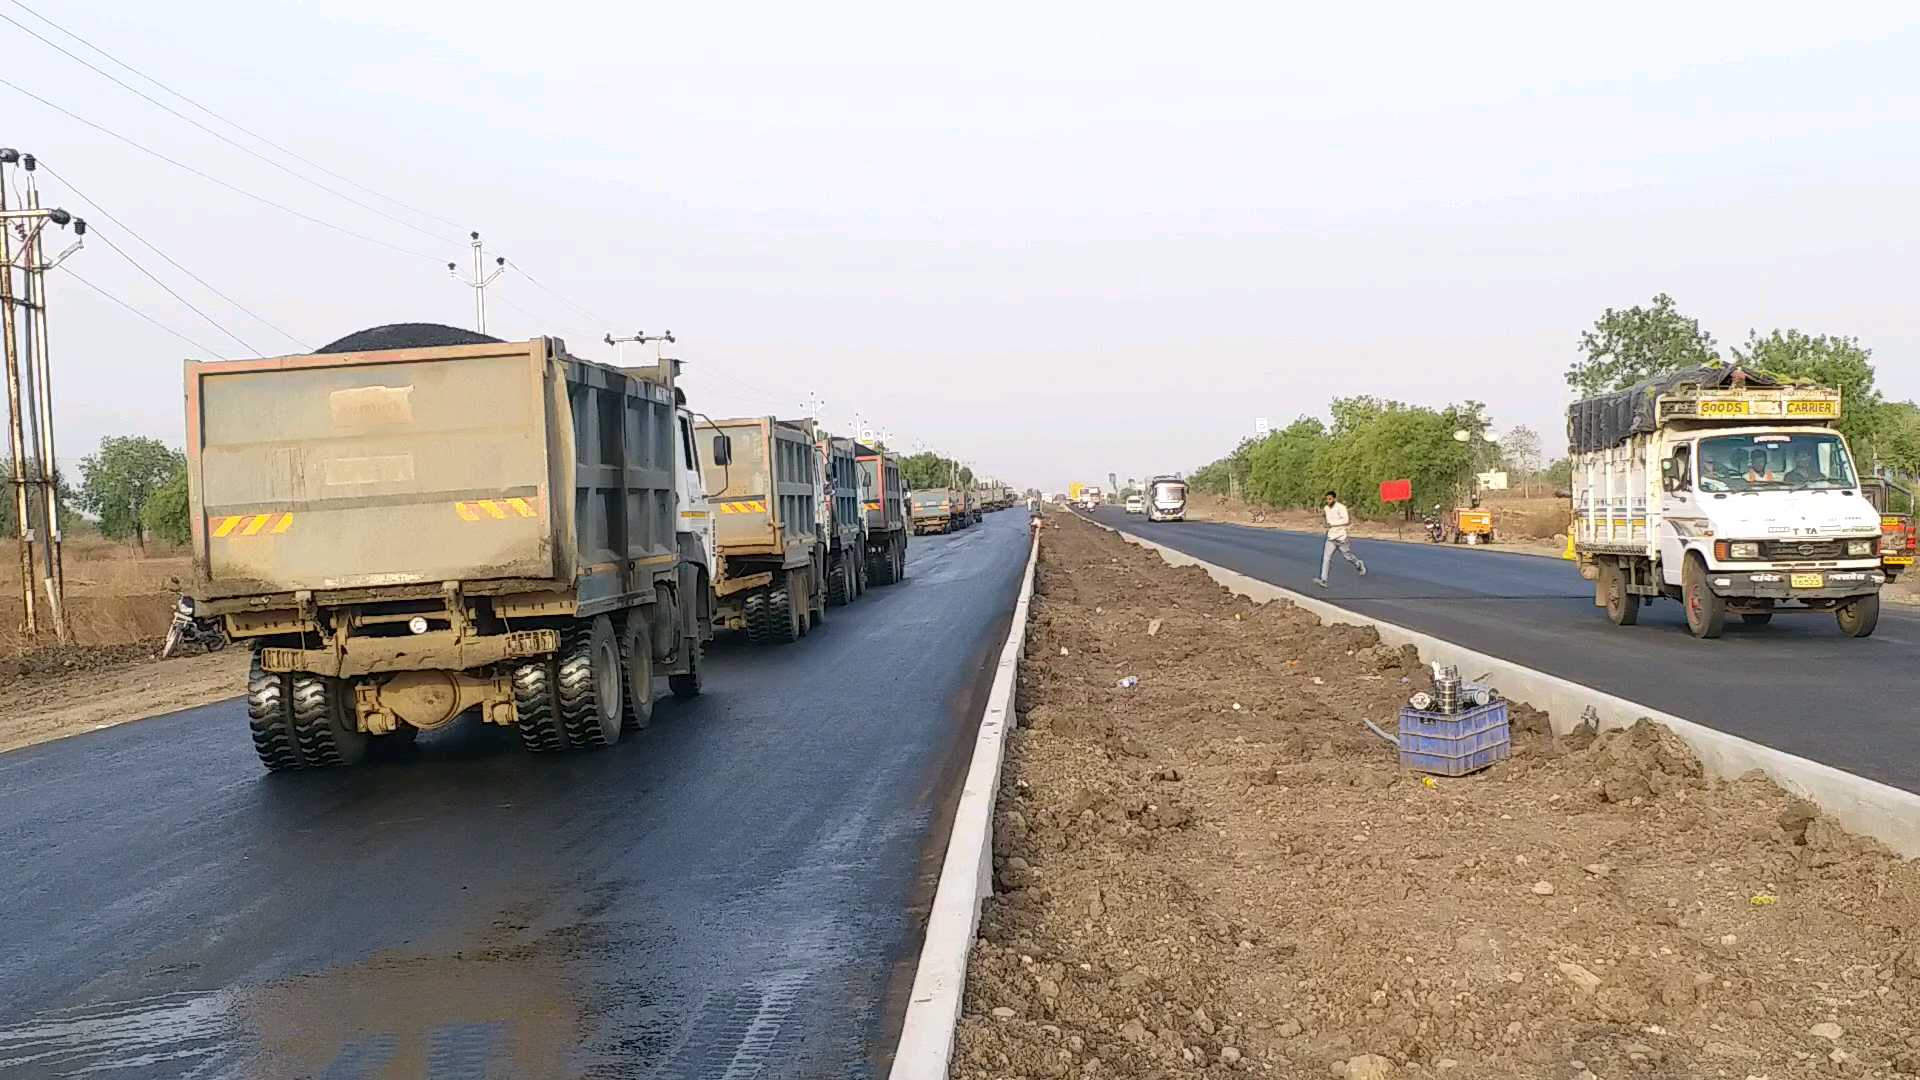 fastest road construction